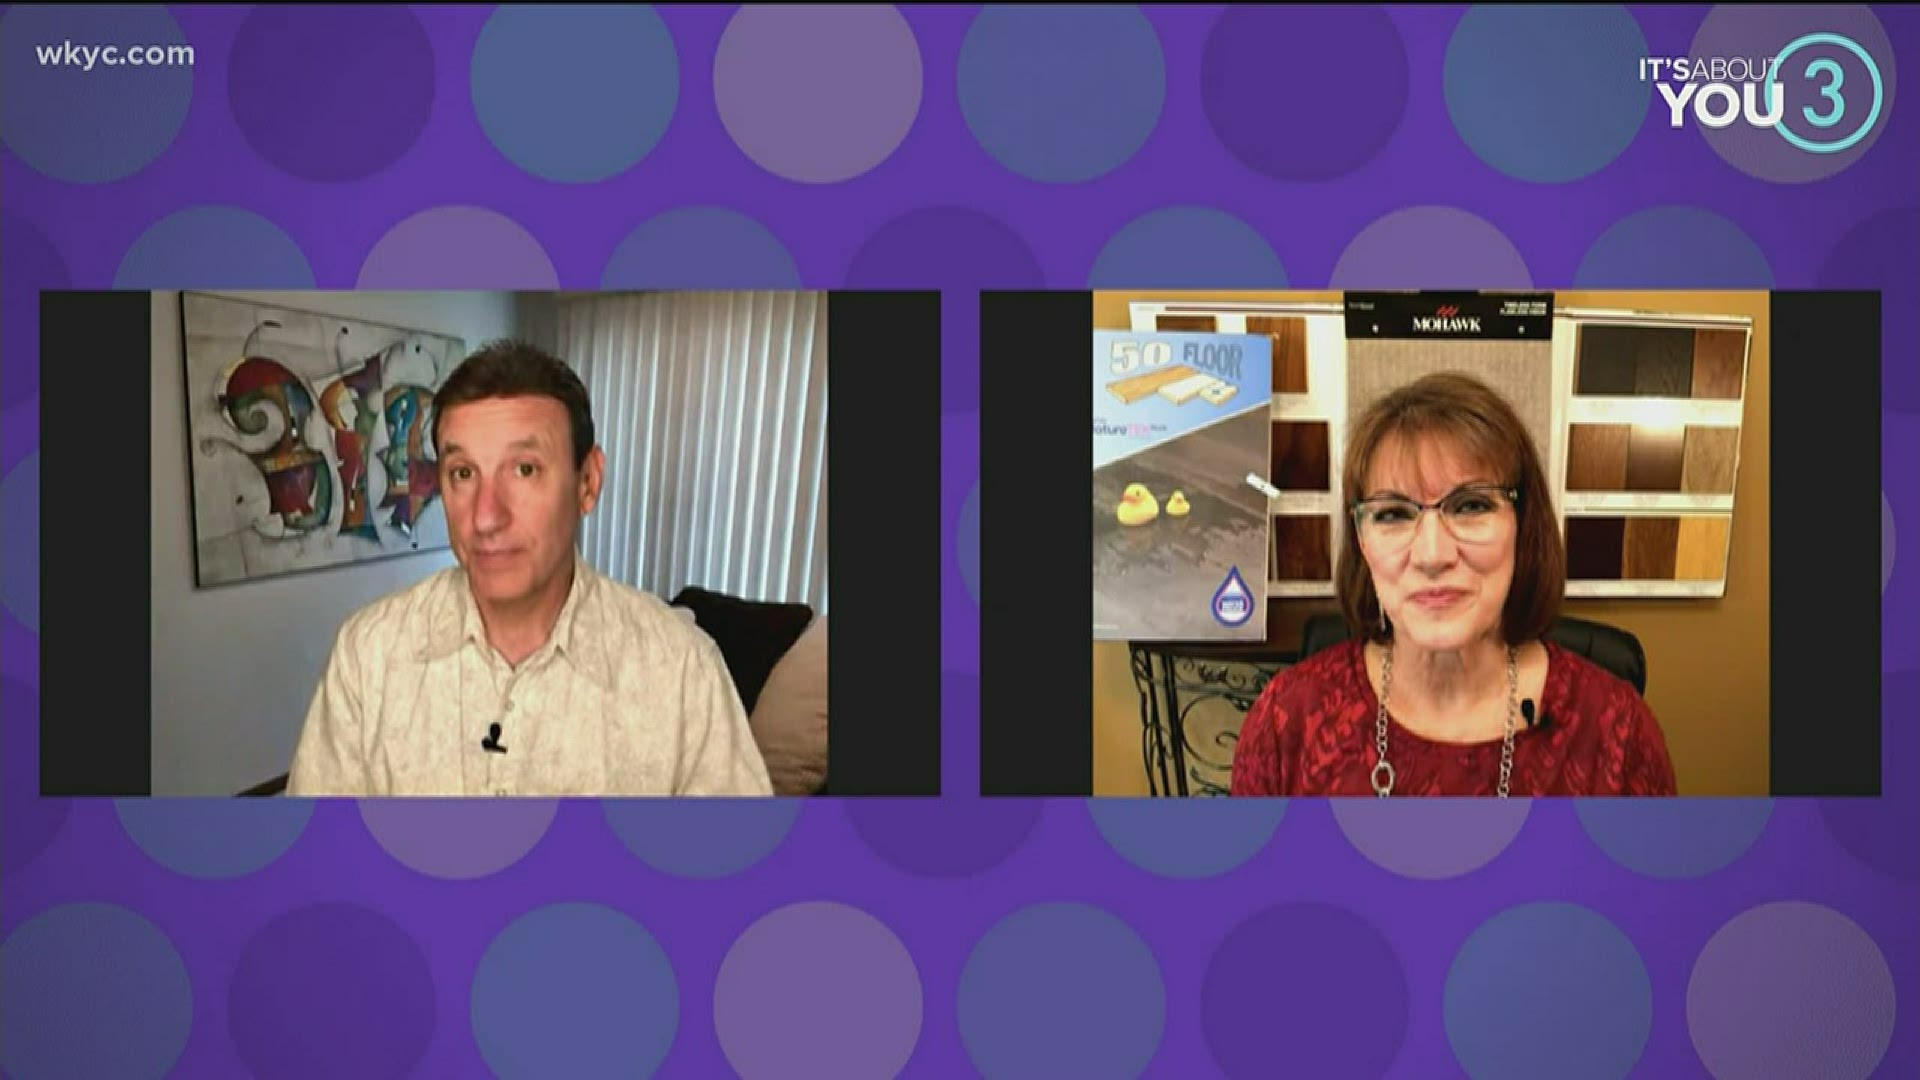 Judy Brown is back to talk to Joe about 50 Floor's June deals and their safe, in-home viewing so you can see what your new floors will look like in your home!